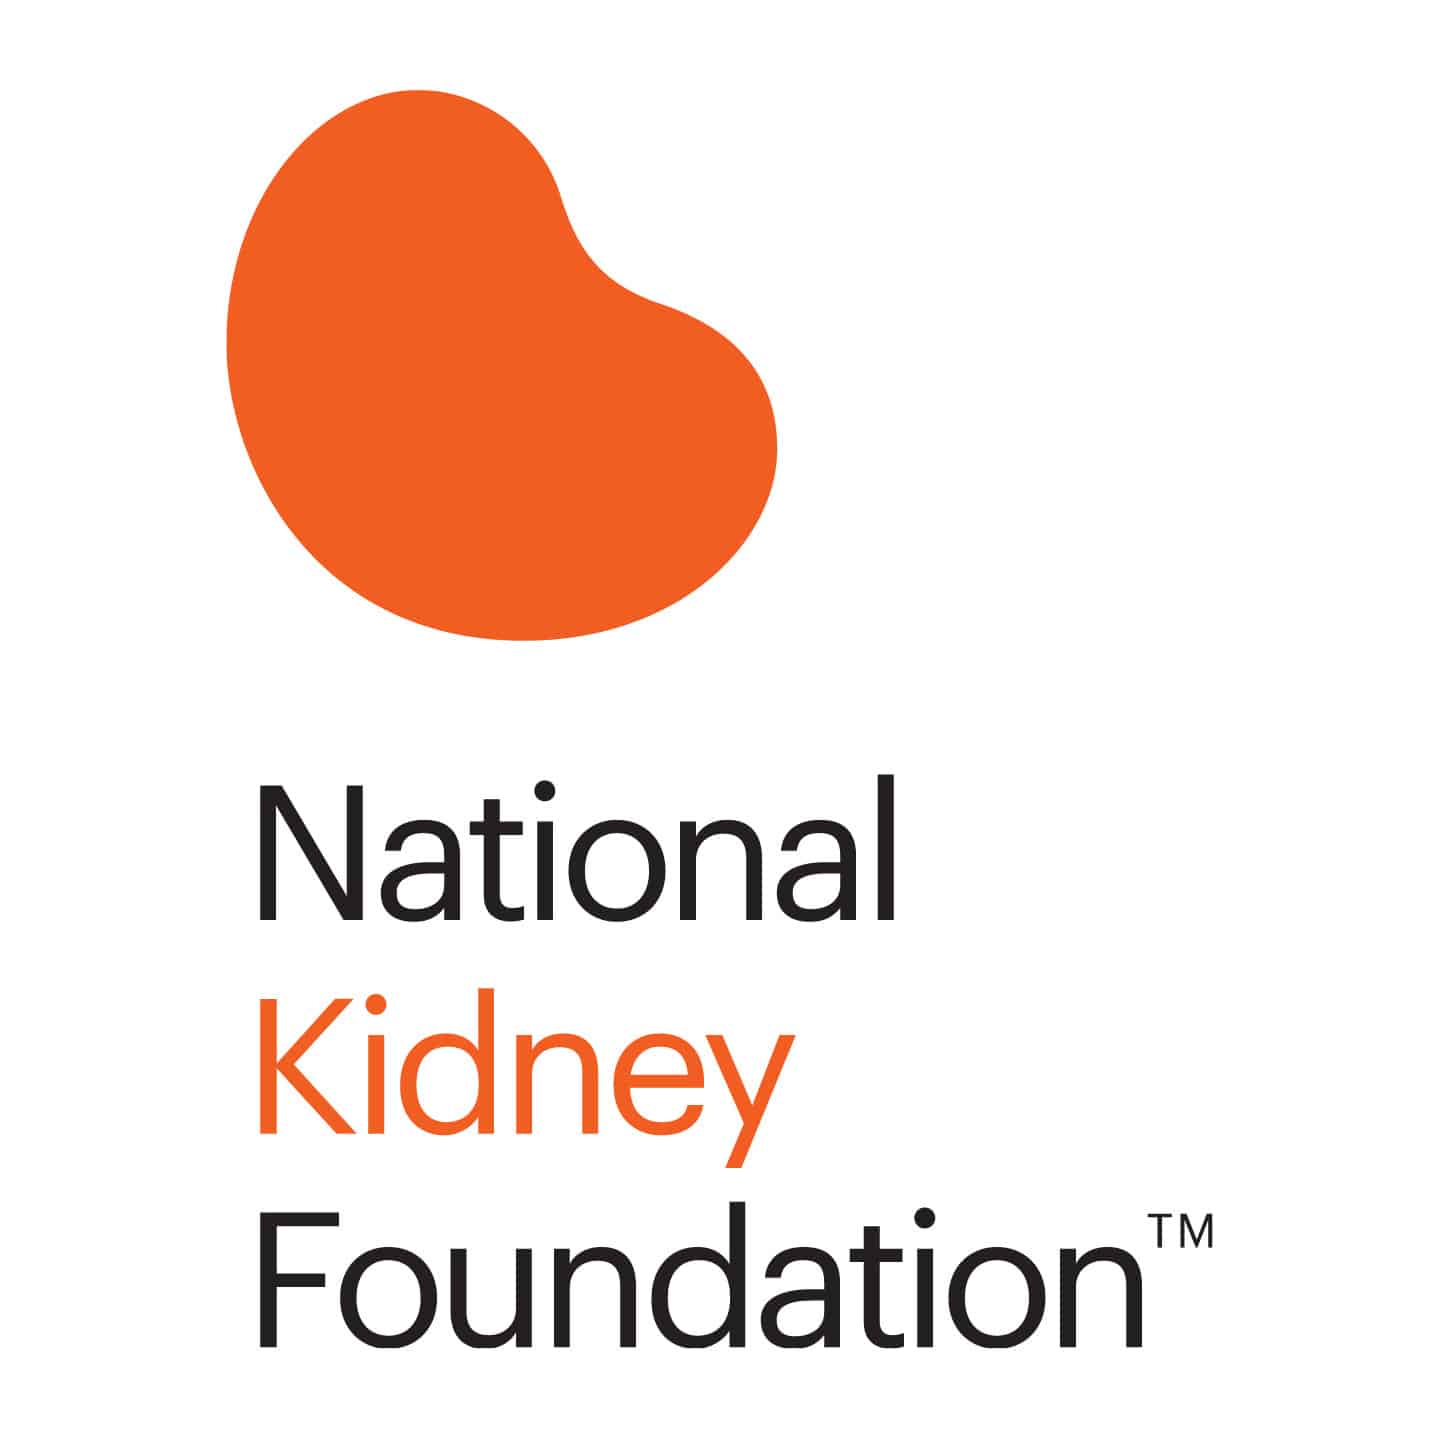 What Is The National Kidney Foundation